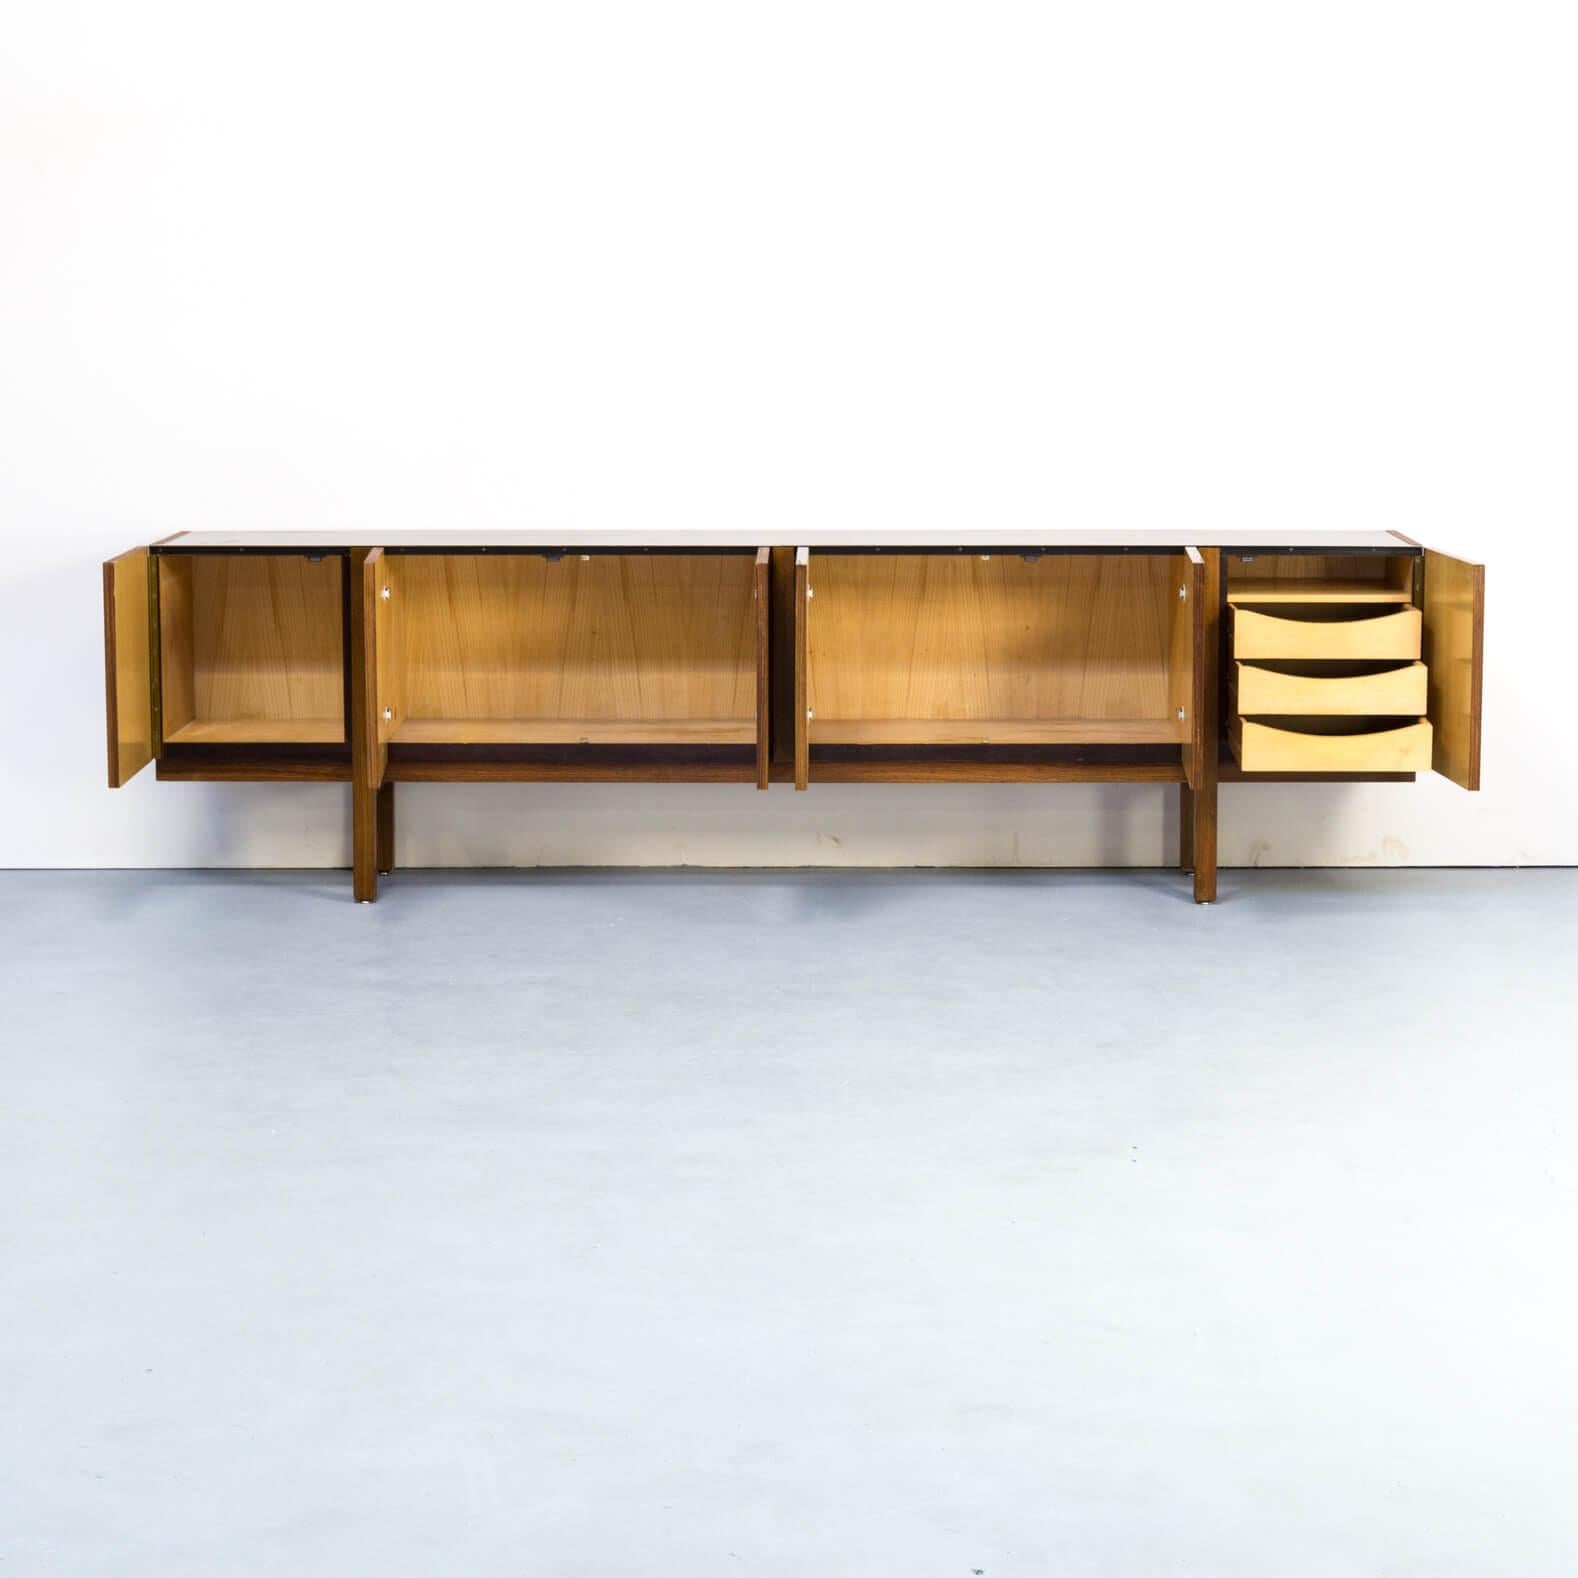 1970s teak veneer large credenza sideboard. Beautiful 1970s teak veneer 270cm large sideboard in minimalistic style. Sideboard has 6 handleless doors with 3 inside drawers behind one. The sideboard is carried by only 4 straight legs and the doors